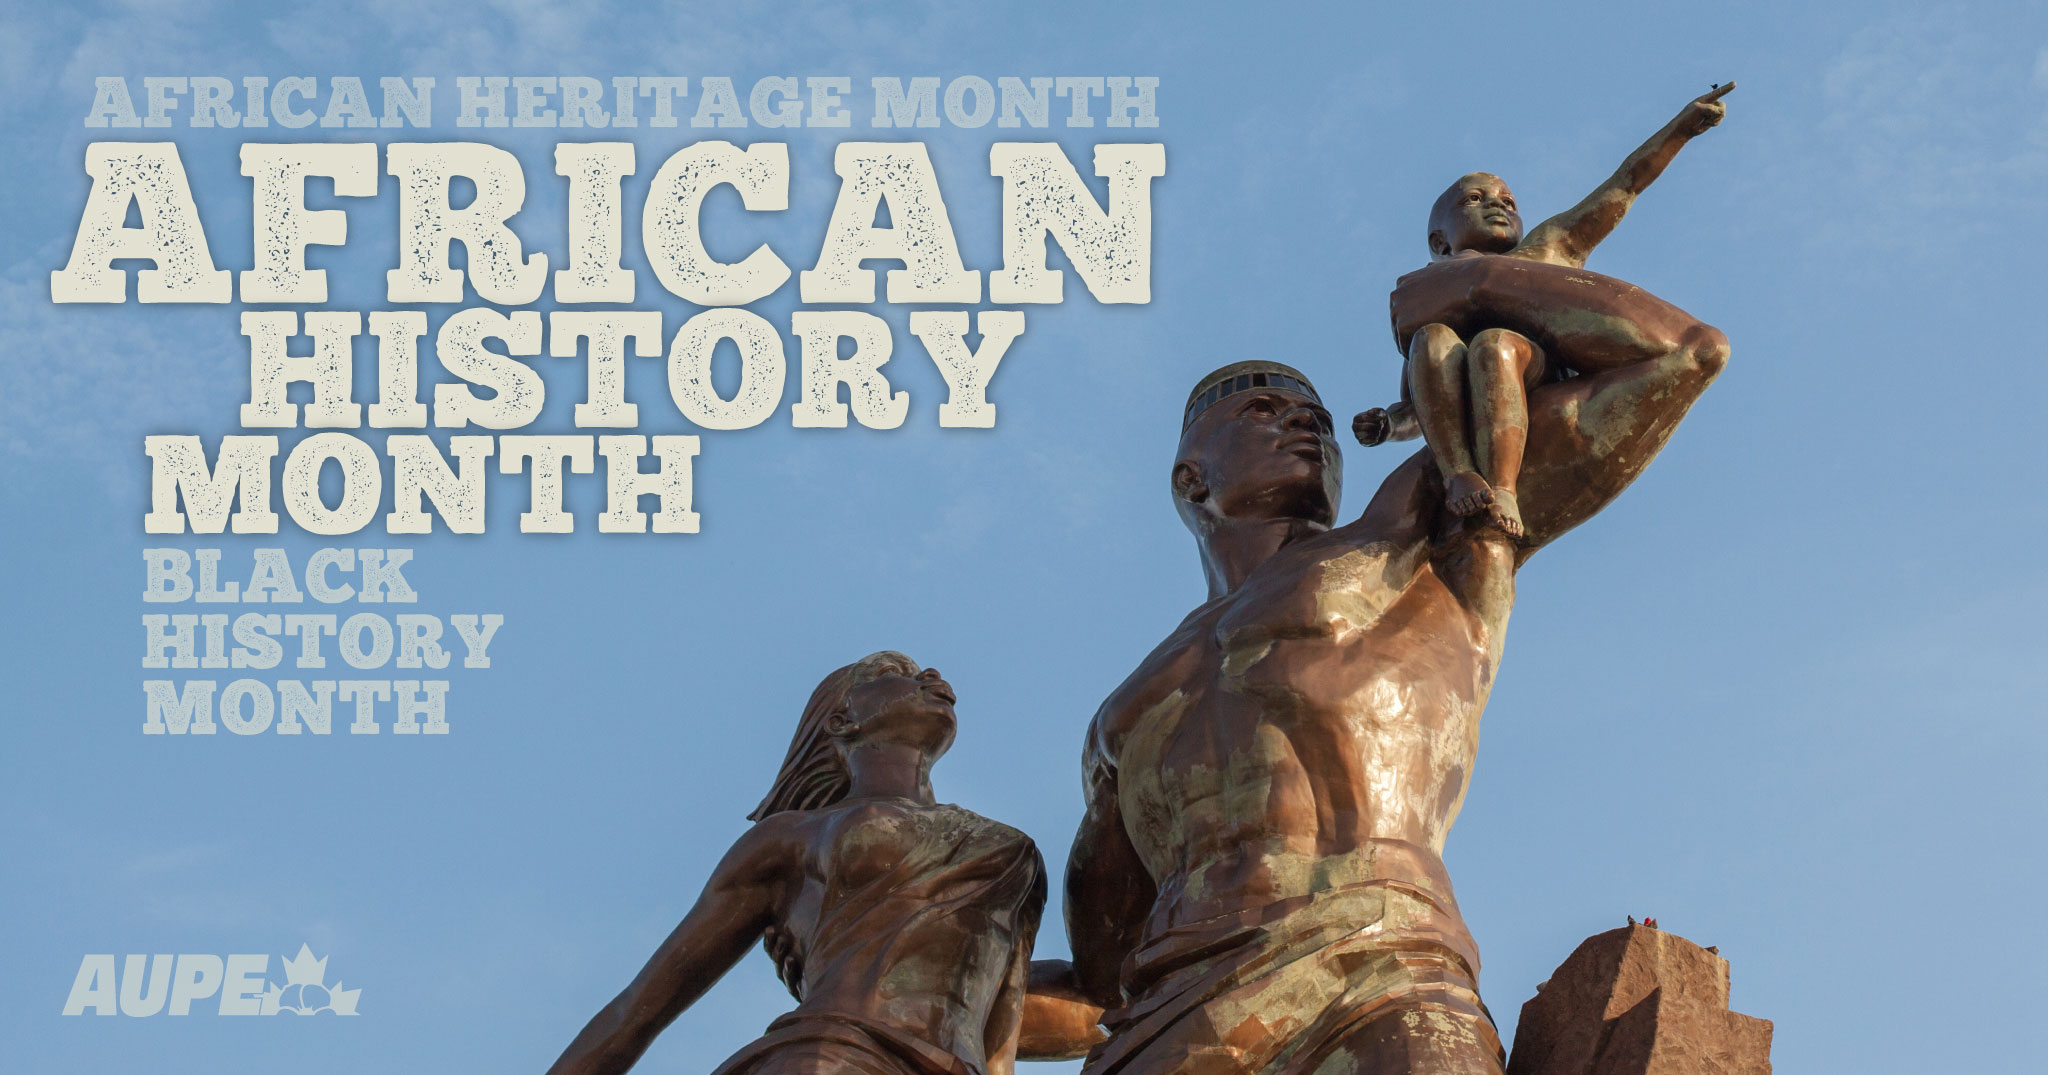 African Heritage Month, Black History Month, or African History